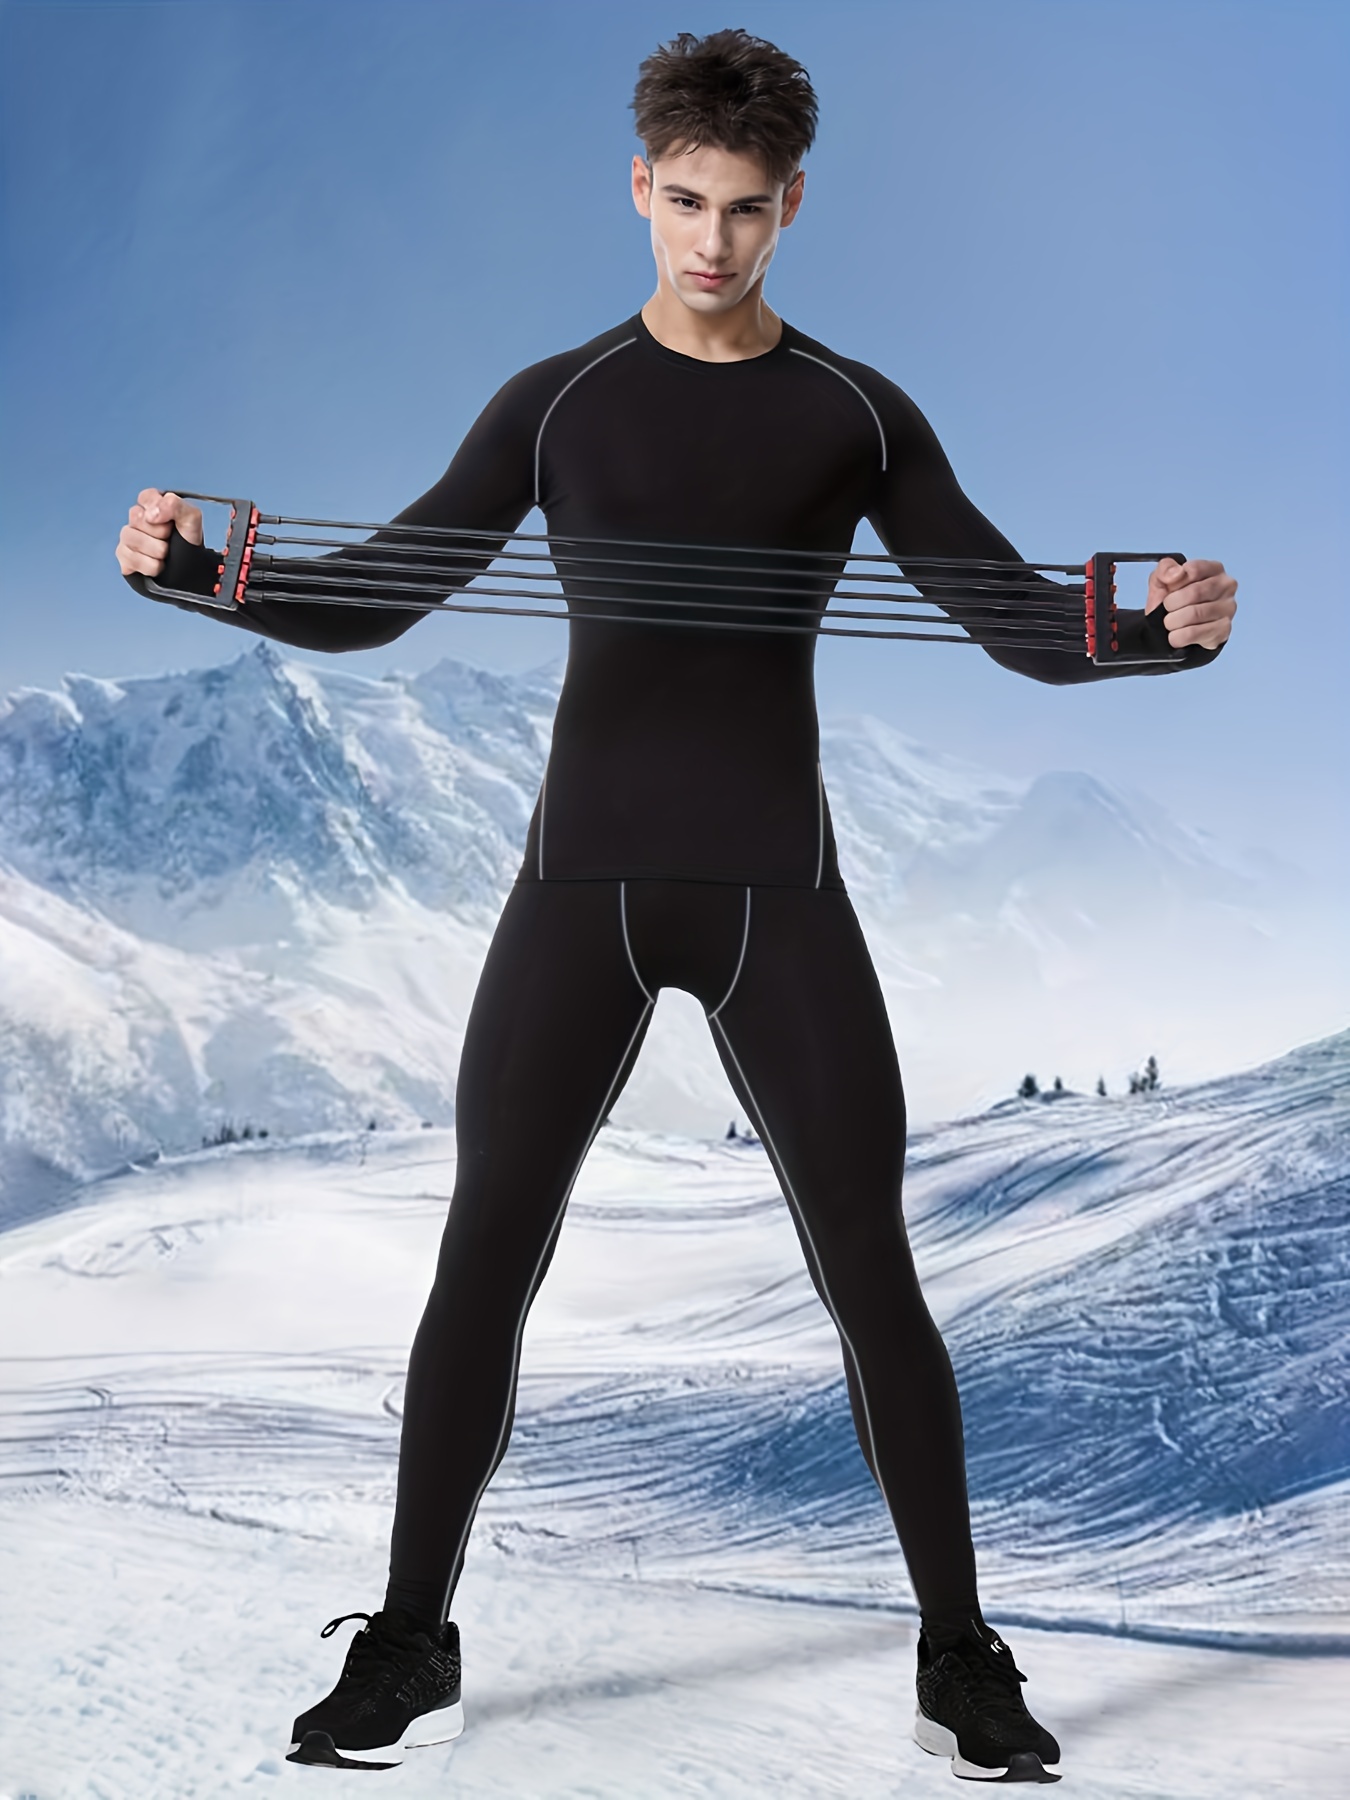 Winter Thermal Mens Compression Base Layer Under Full Suit Tights